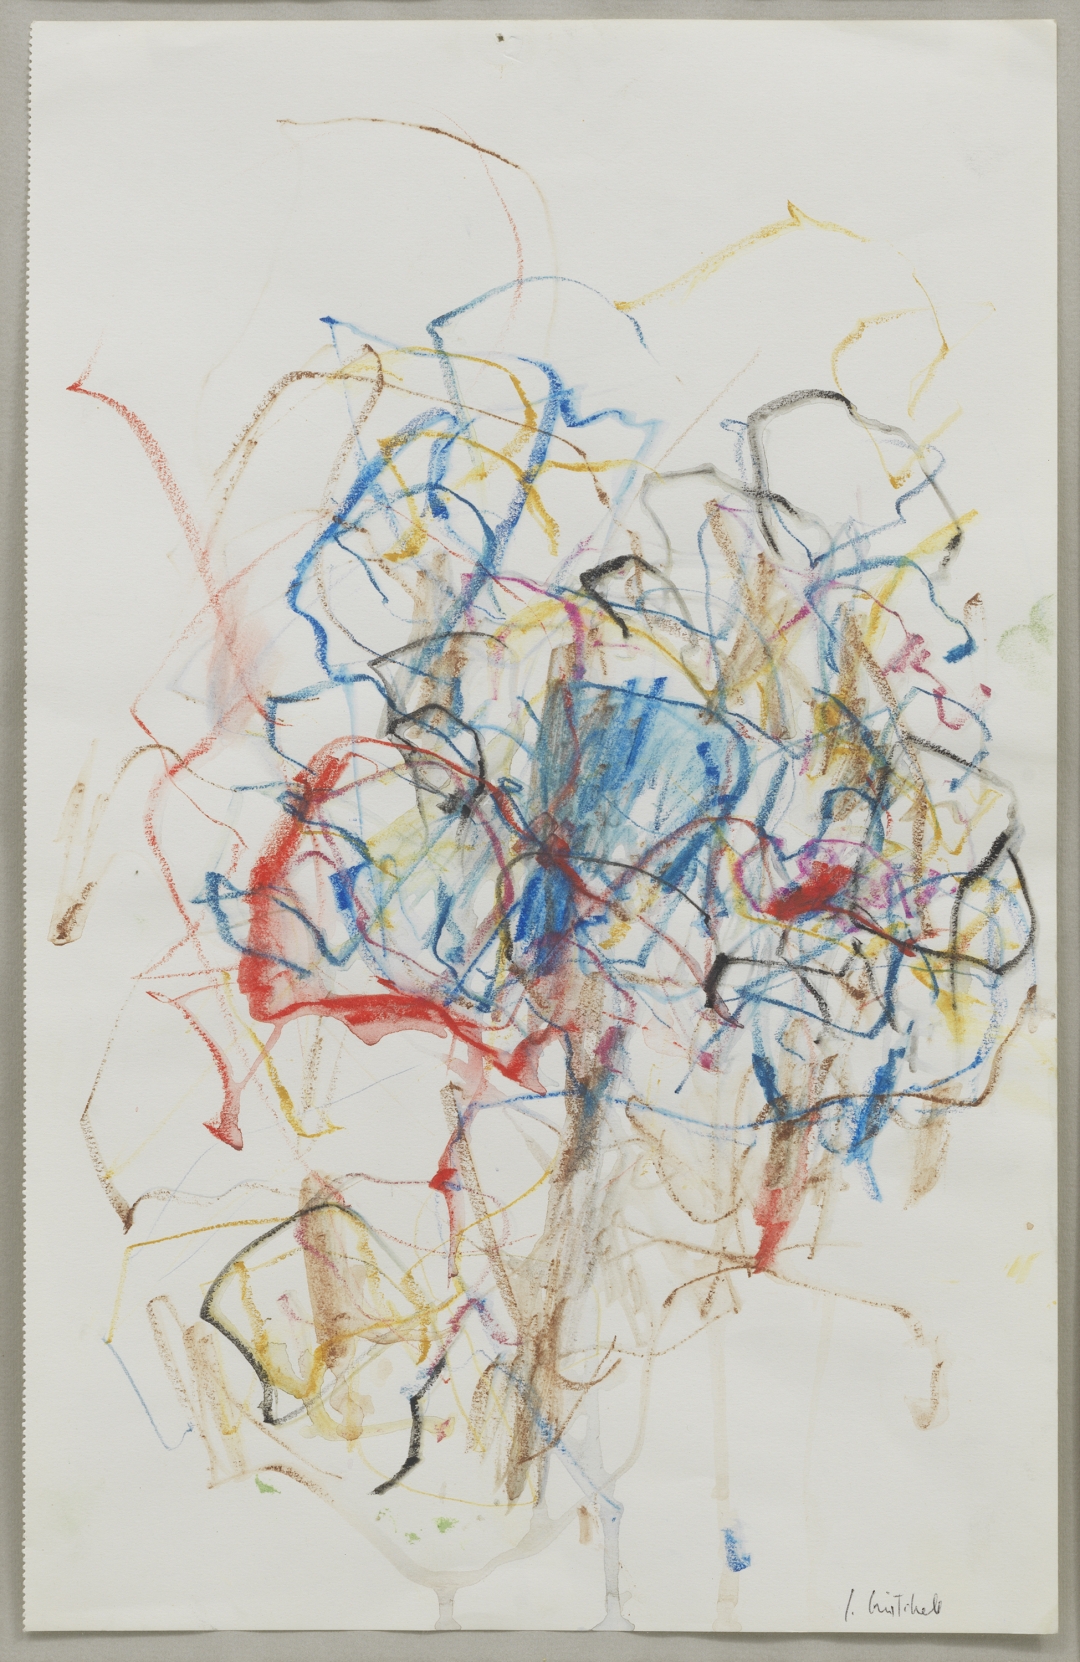 Joan Mitchell, <i>Tree</i>, c.1967, water-soluble wax crayon and wash on paper, 14 1/2 x 9 1/8 in. (36.83 x 23.18 cm)